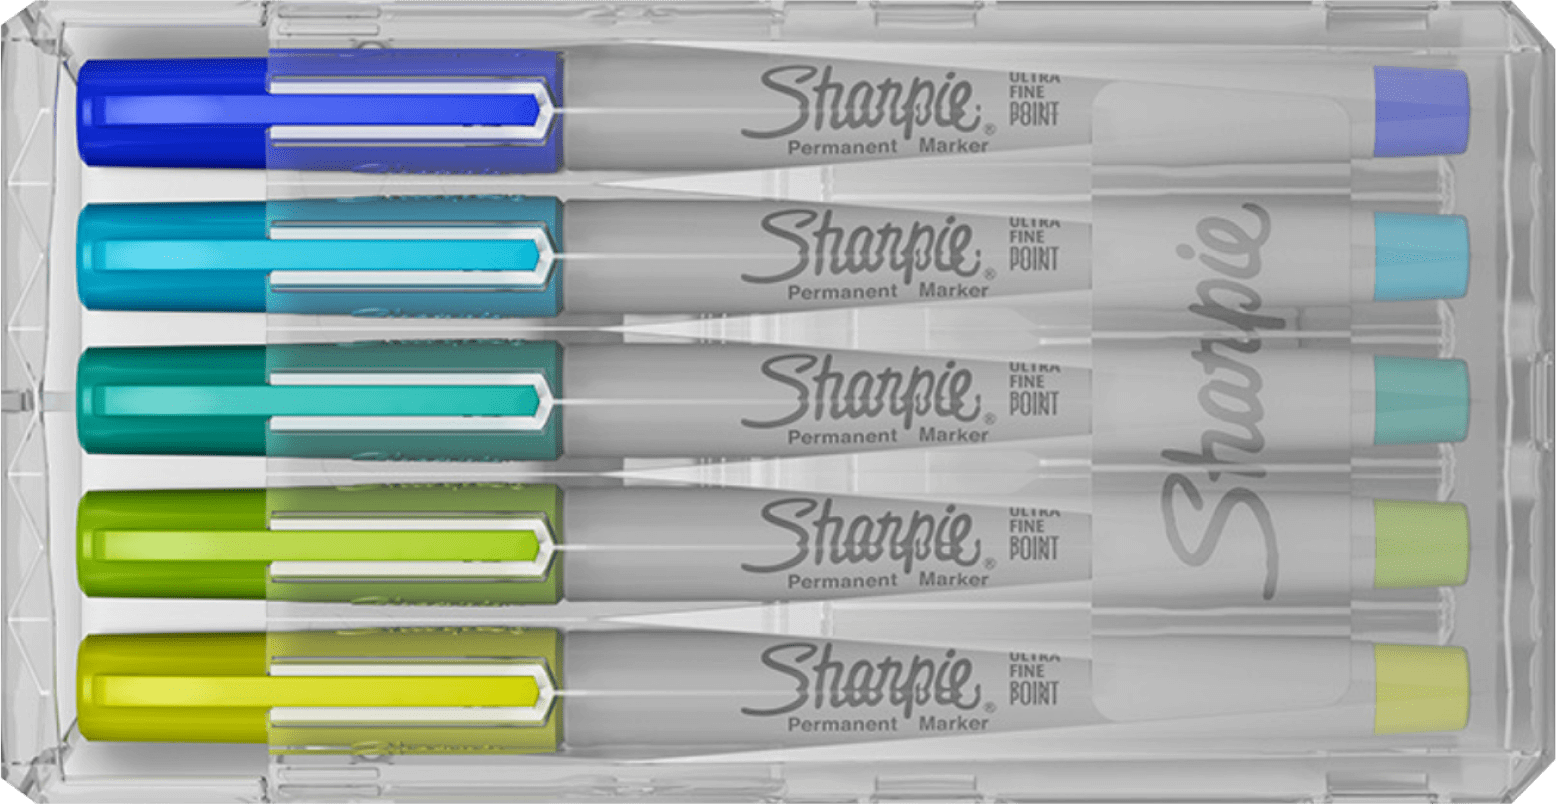 Sharpie Product Packaging